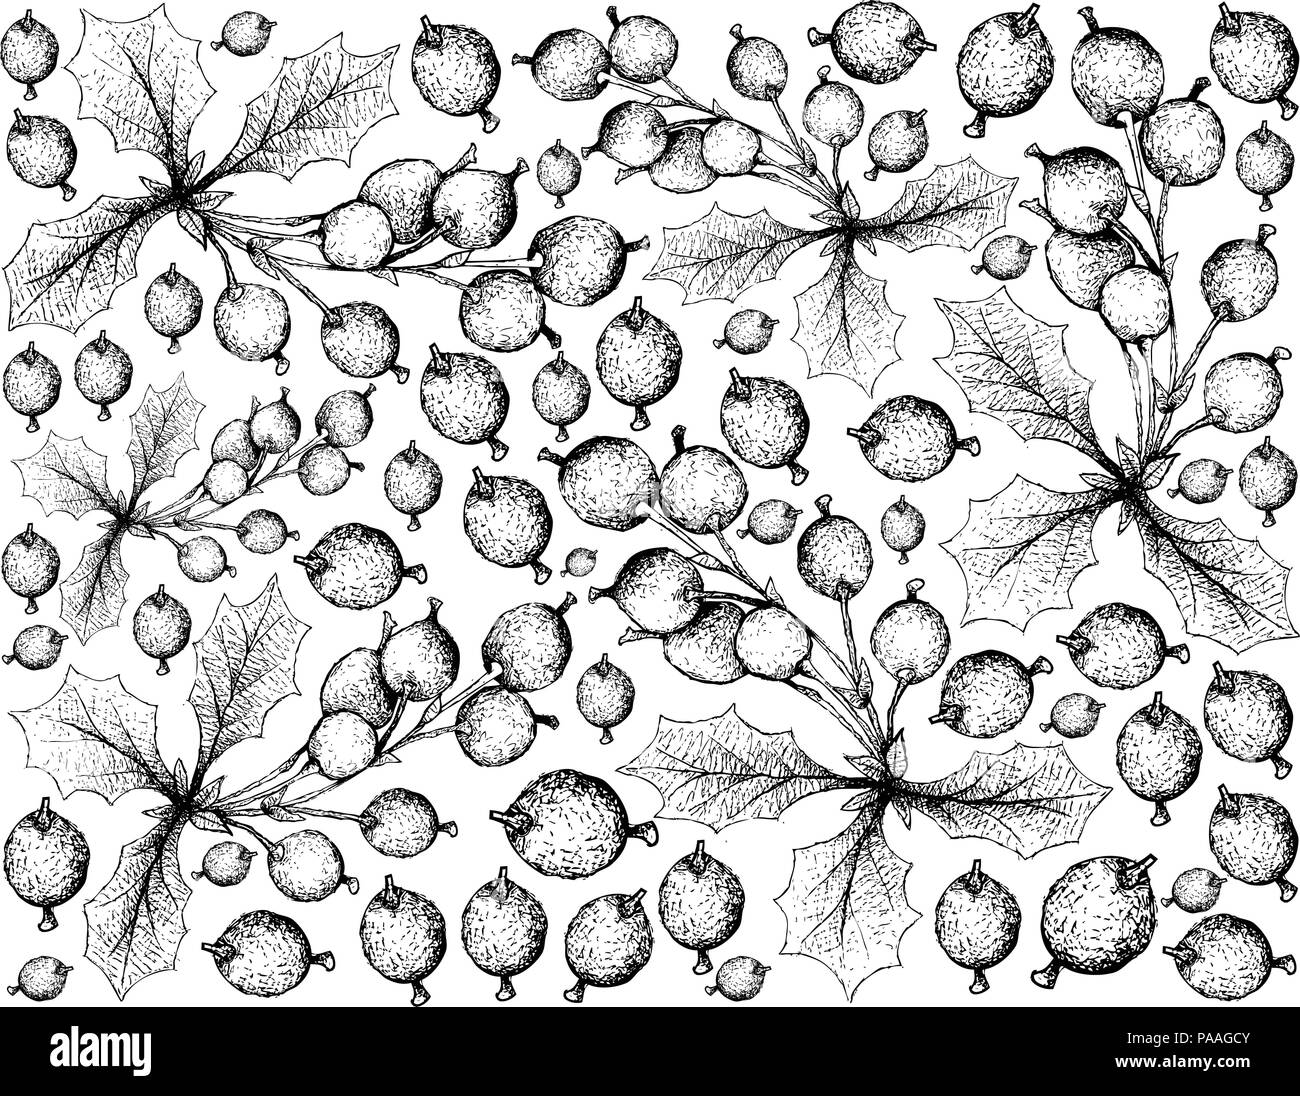 Berry Fruit, Illustration Wallpaper Hand Drawn Sketch of Fresh Barberries or Berberis Vulgaris Fruits Isolated on White Background. Stock Vector